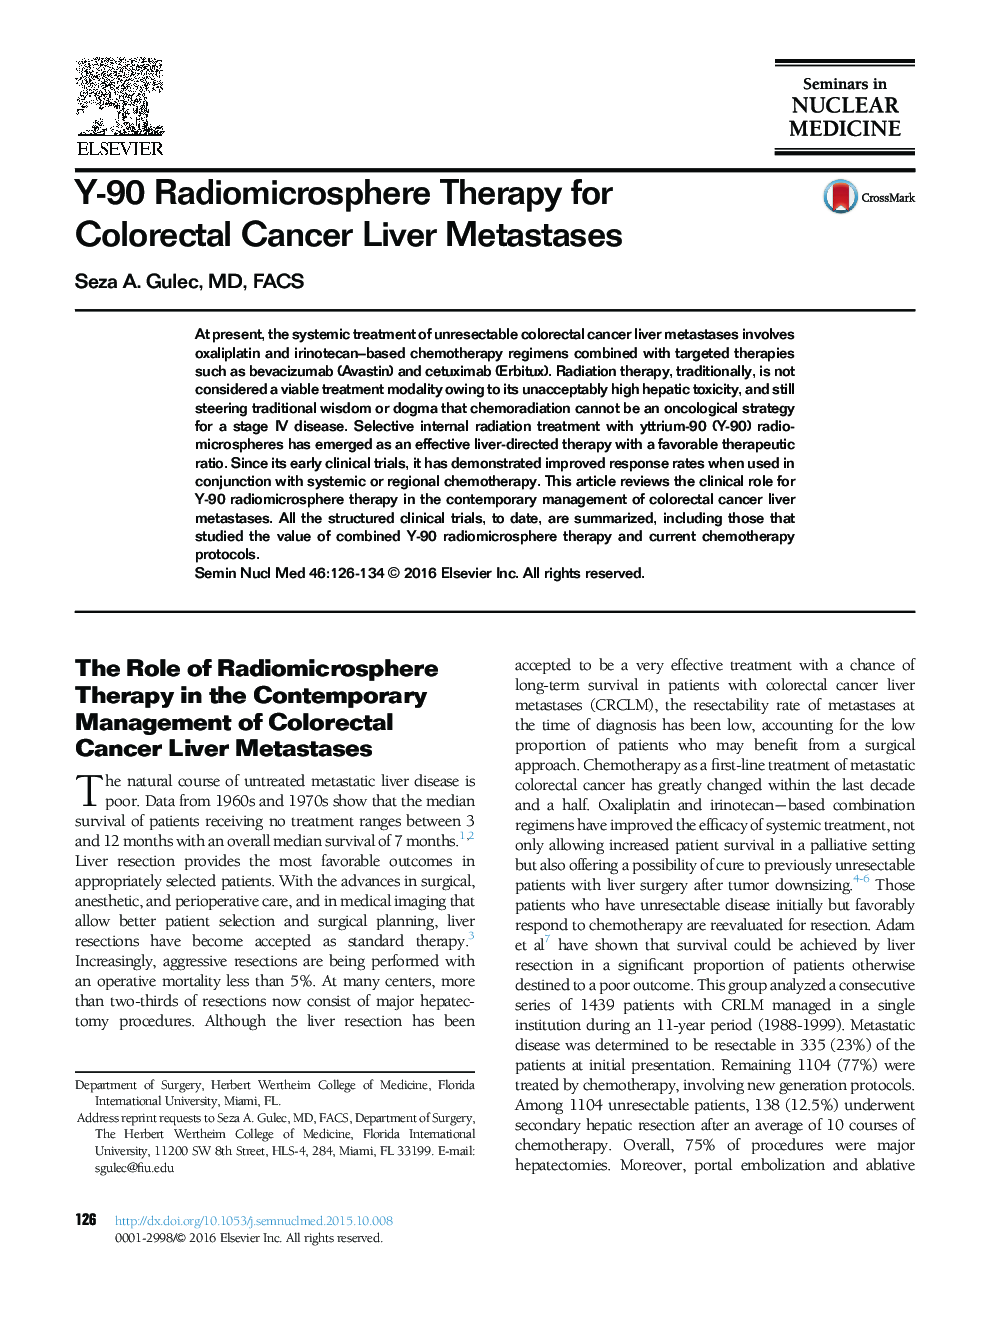 Y-90 Radiomicrosphere Therapy for Colorectal Cancer Liver Metastases